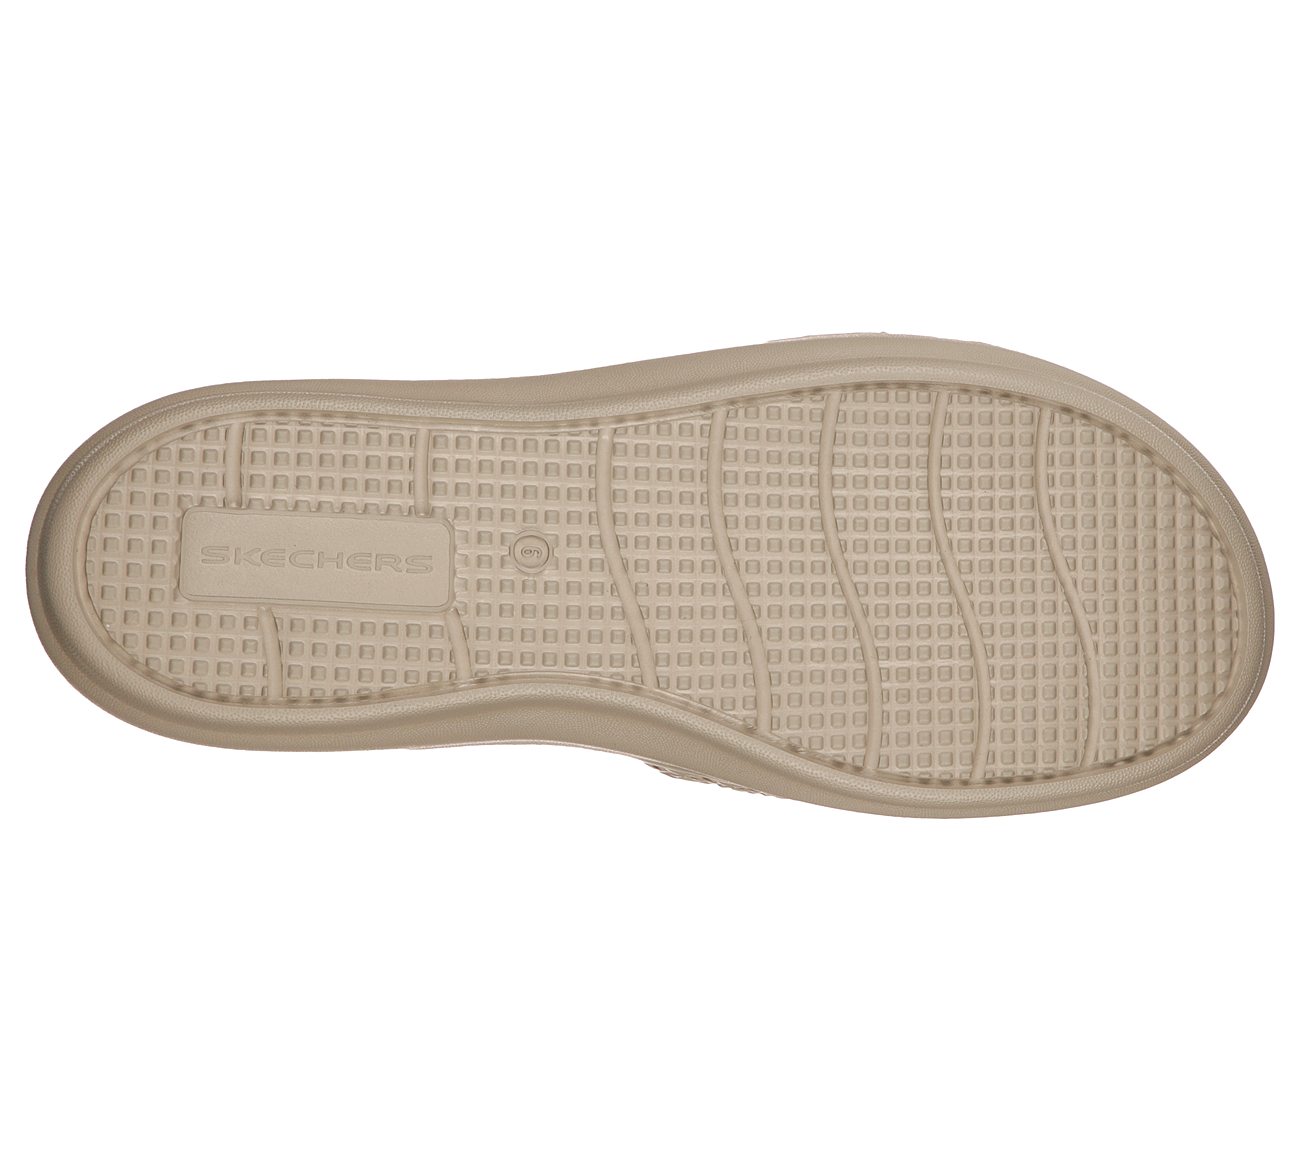 ARCH FIT ASCEND - DARLING, TTAUPE Footwear Bottom View